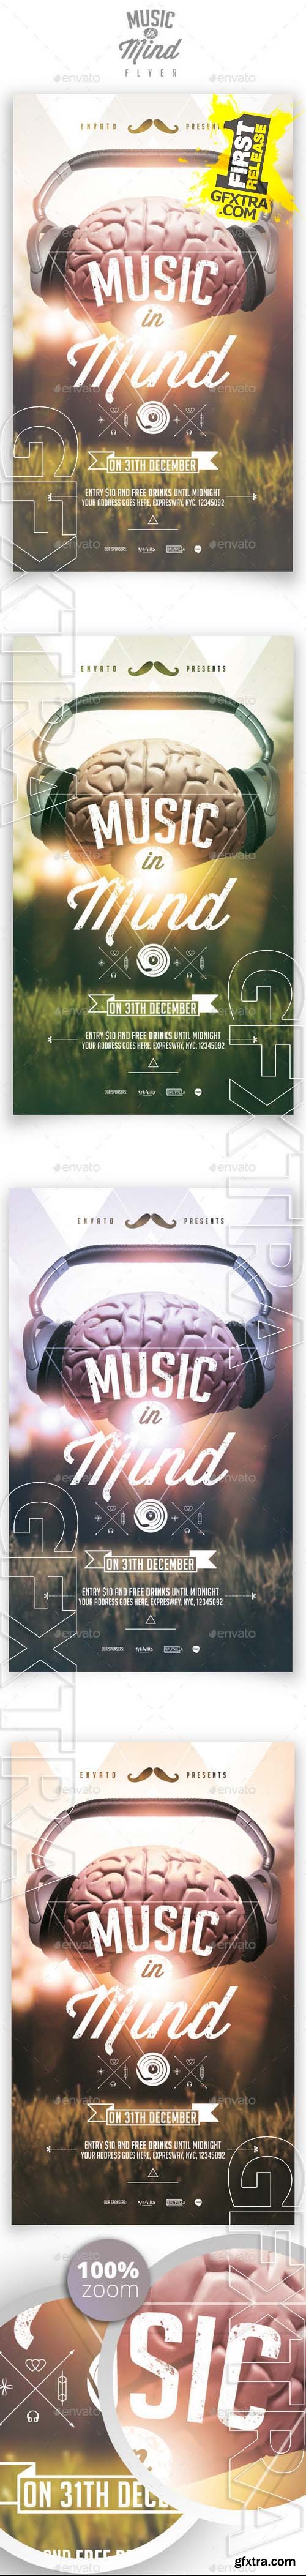 Music in Mind Flyer Template - GraphicRiver 9020350